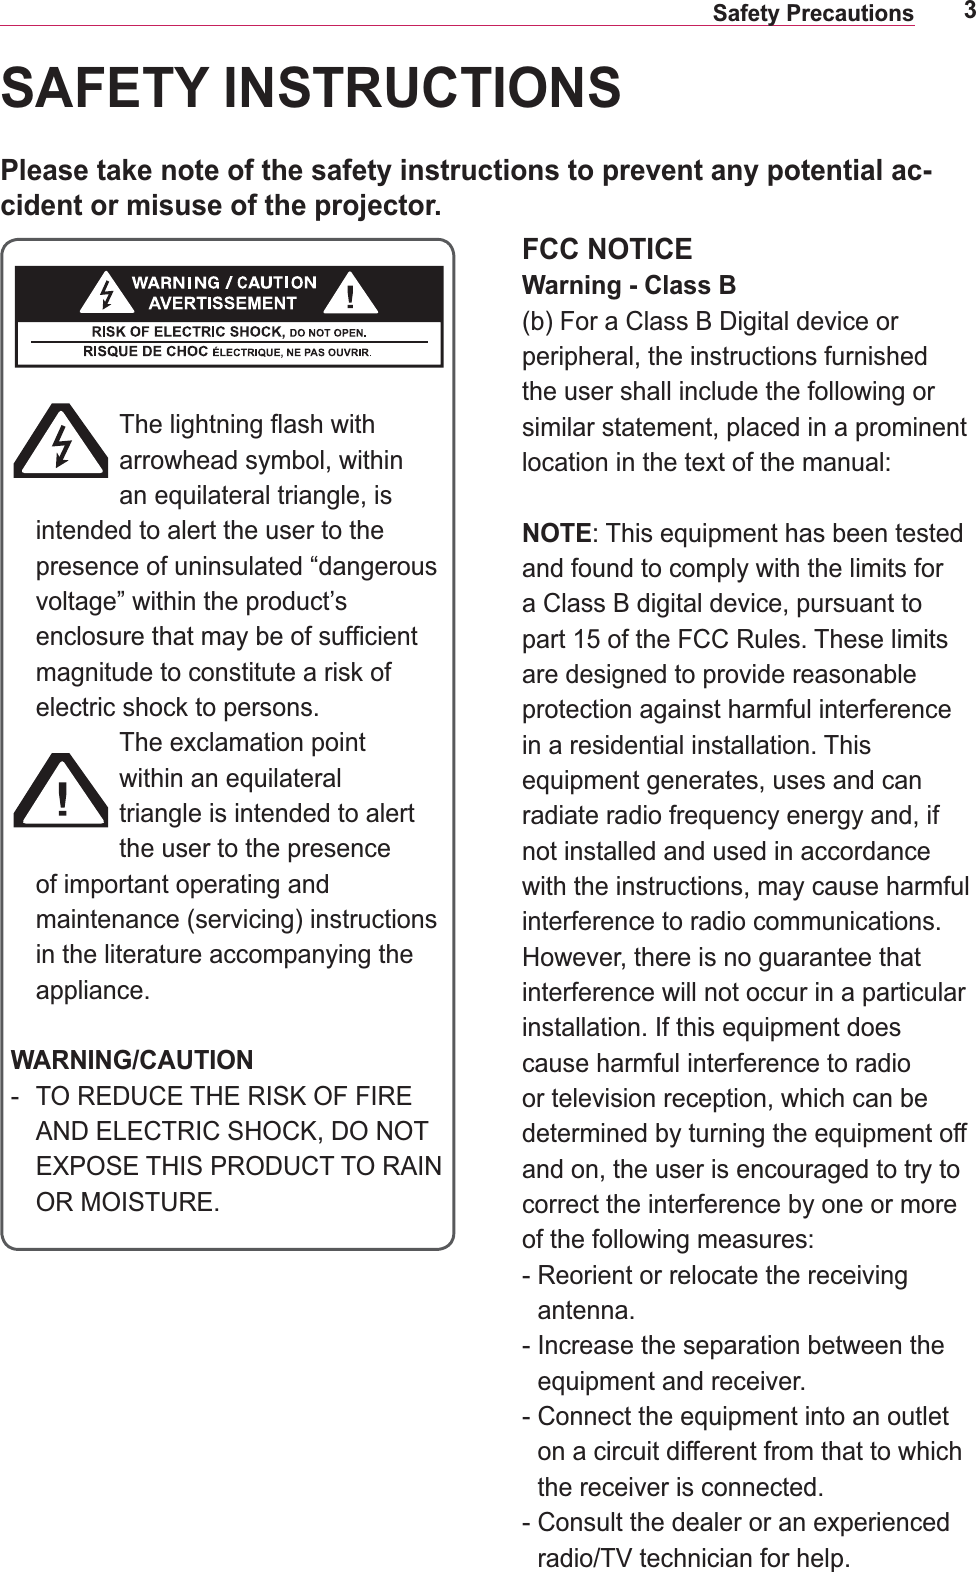 3Safety PrecautionsFCC NOTICEWarning - Class B(b) For a Class B Digital device or peripheral, the instructions furnished the user shall include the following or similar statement, placed in a prominent NOTE: This equipment has been tested and found to comply with the limits for a Class B digital device, pursuant to are designed to provide reasonable protection against harmful interference in a residential installation. This equipment generates, uses and can radiate radio frequency energy and, if not installed and used in accordance with the instructions, may cause harmful interference to radio communications. interference will not occur in a particular installation. If this equipment does cause harmful interference to radio or television reception, which can be determined by turning the equipment off and on, the user is encouraged to try to correct the interference by one or more of the following measures:-  Reorient or relocate the receiving antenna.-  Increase the separation between the equipment and receiver.-  Connect the equipment into an outlet on a circuit different from that to which the receiver is connected.radio/TV technician for help.SAFETY INSTRUCTIONSPlease take note of the safety instructions to prevent any potential ac-cident or misuse of the projector.arrowhead symbol, within an equilateral triangle, is intended to alert the user to the presence of uninsulated “dangerous voltage” within the product’s magnitude to constitute a risk of electric shock to persons.within an equilateral triangle is intended to alert the user to the presence of important operating and maintenance (servicing) instructions in the literature accompanying the appliance.WARNING/CAUTION OR MOISTURE.